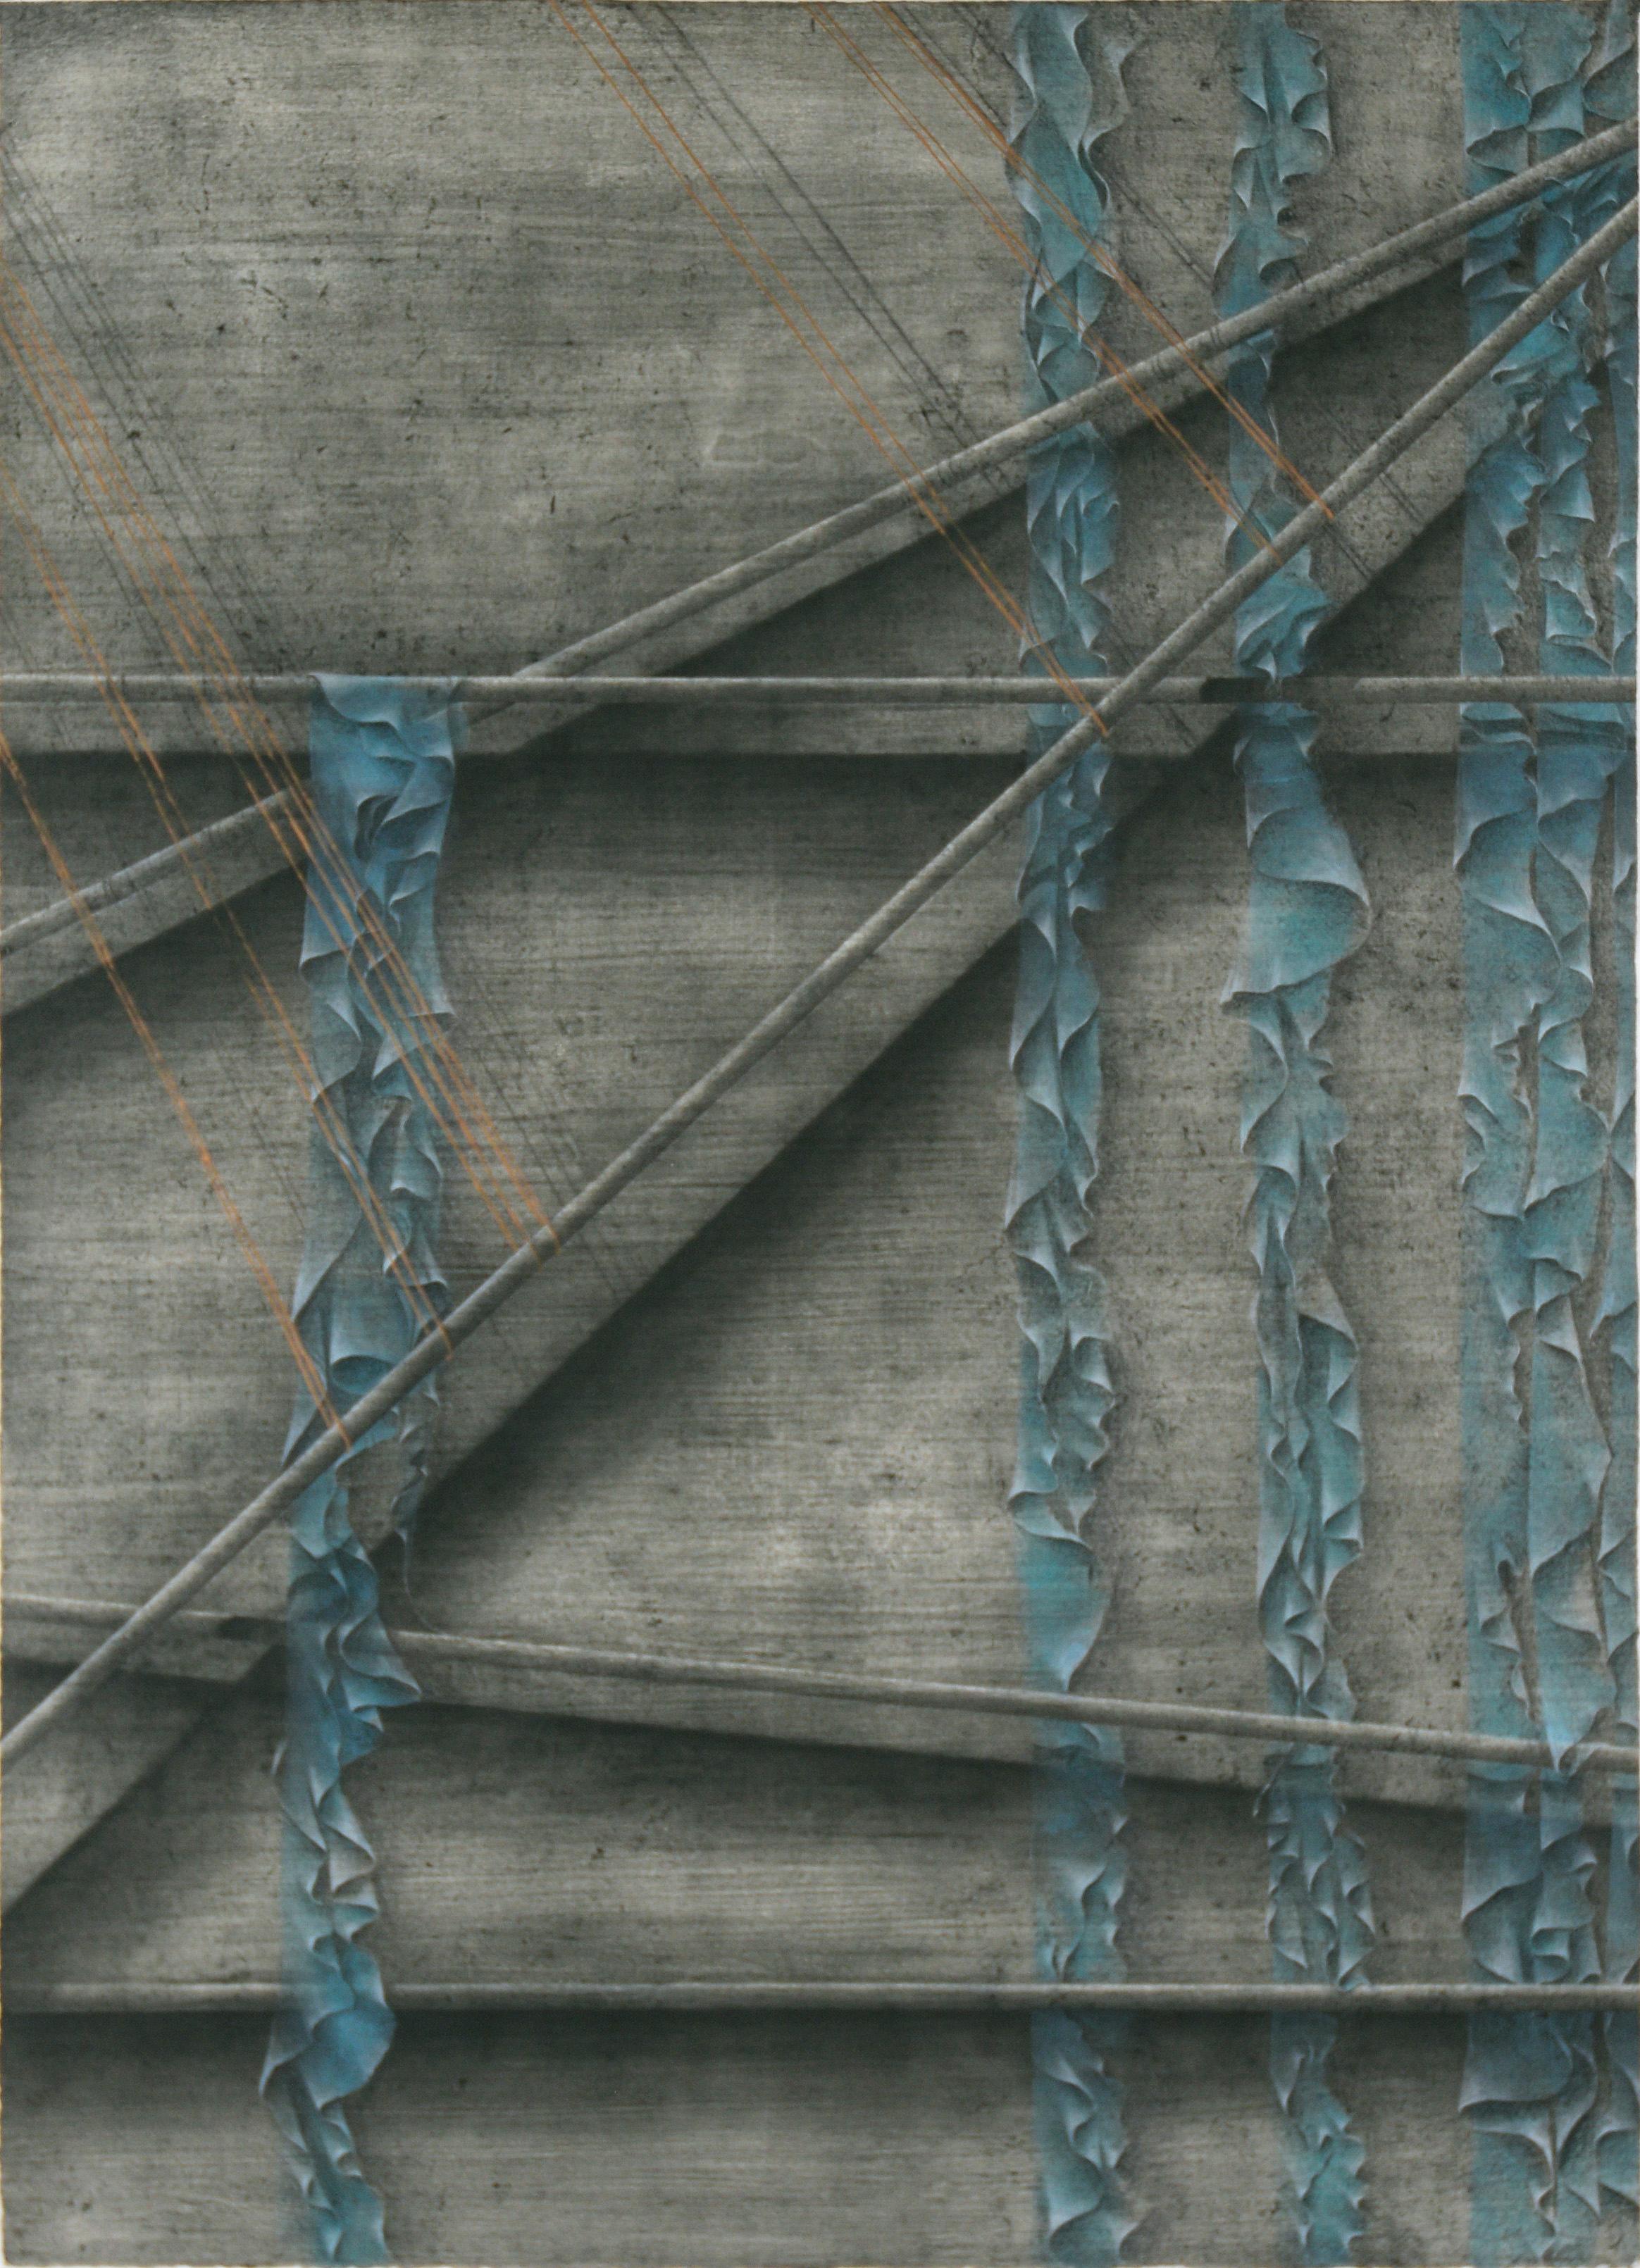 Teal Ribbons and Copper Thread - Photorealistic Drawing on Collotype  - Art by Patricia A Pearce